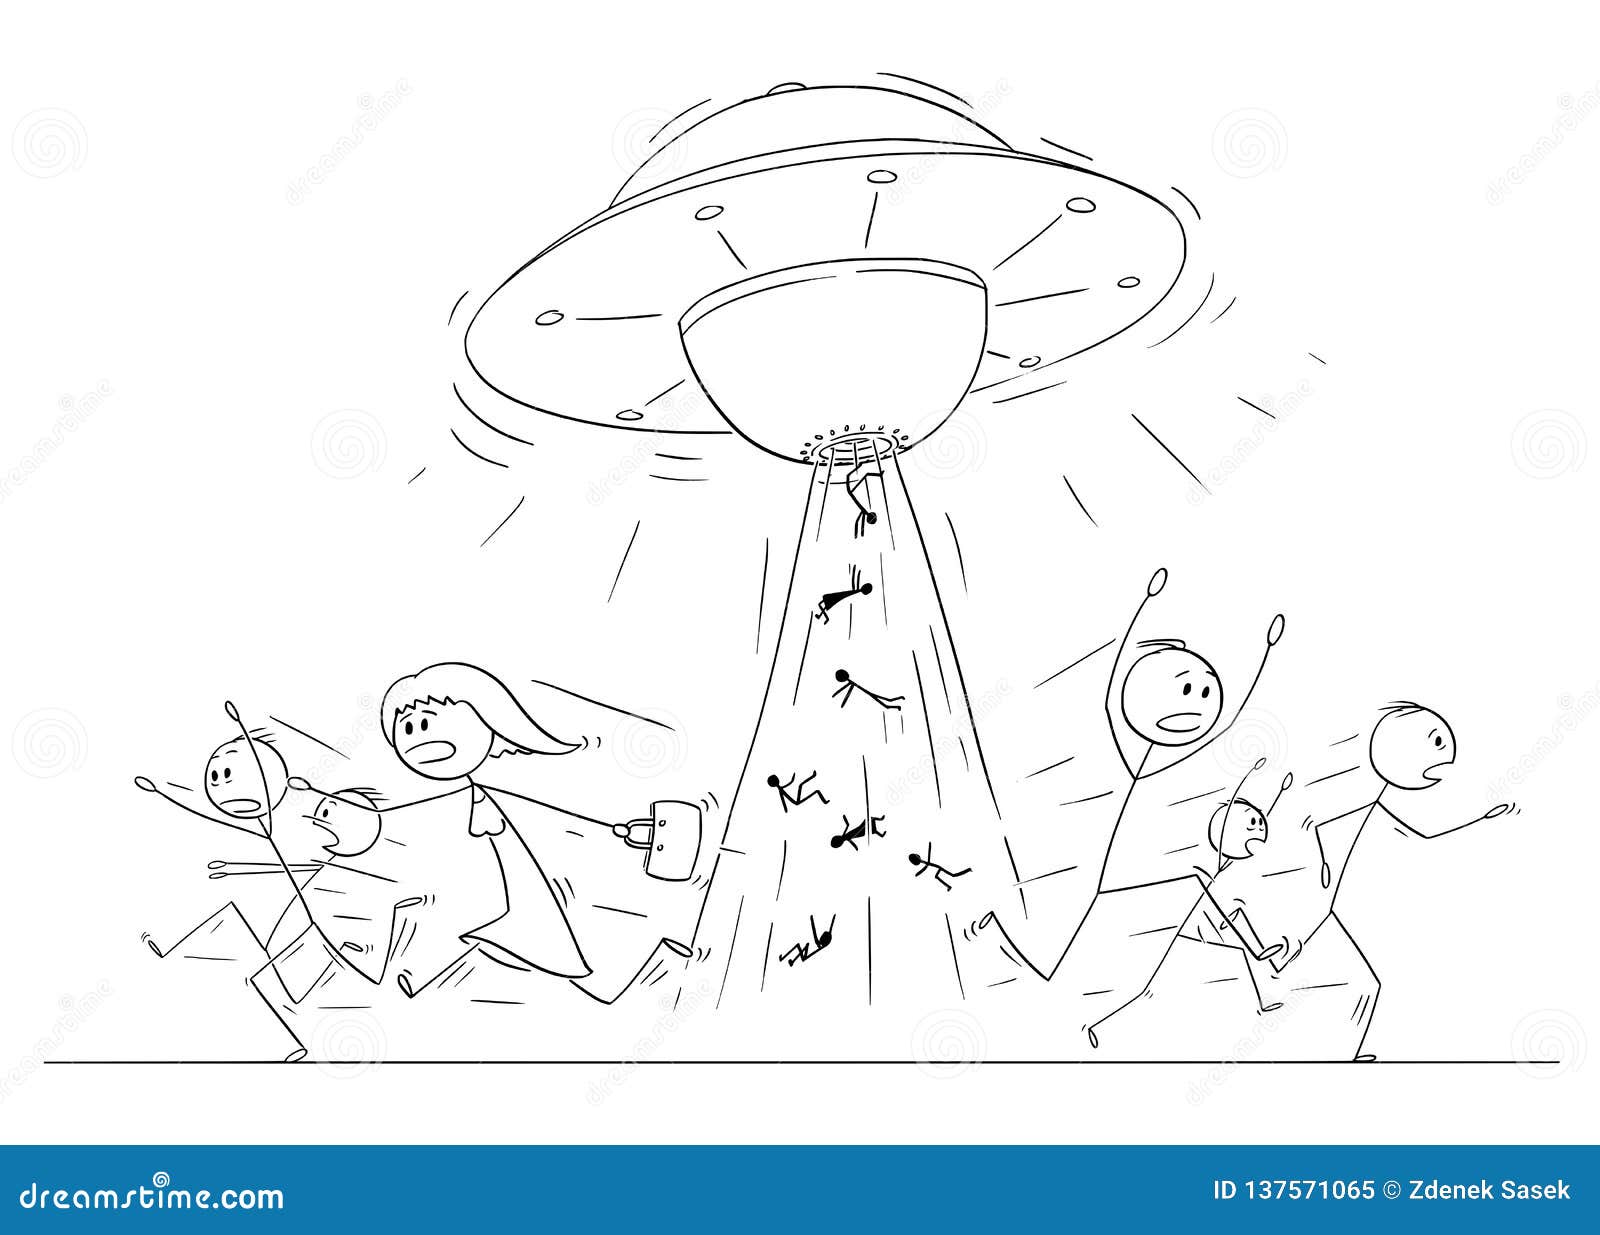 Cartoon Drawing Of Crowd Of People Running In Panic Away From Ufo Or Alien Ship Abducting Human Beings Stock Vector Illustration Of Hand Graphic